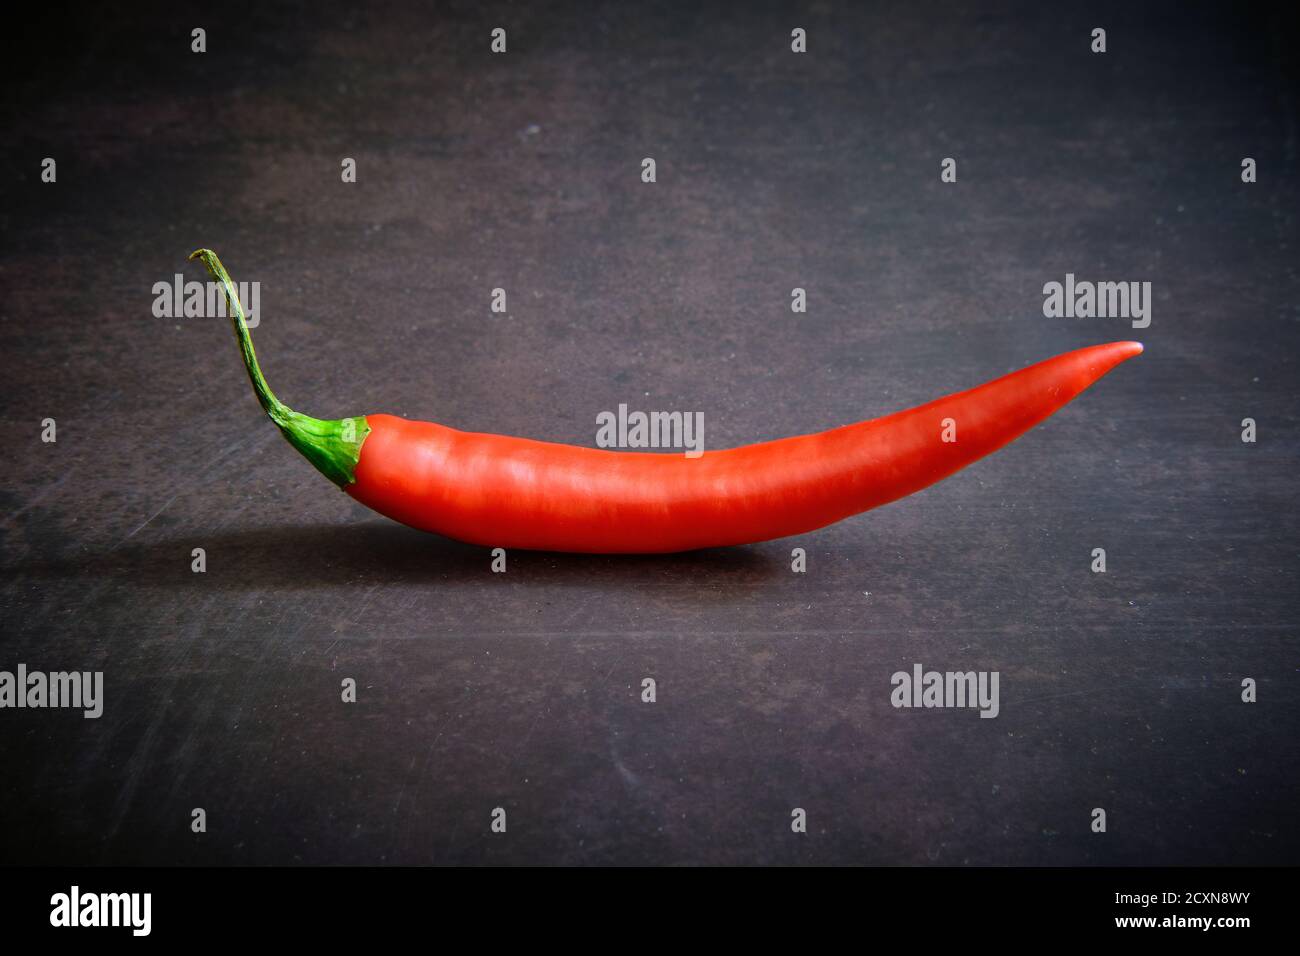 Red chili pepper on dark background. Good for spicy food background. Stock Photo